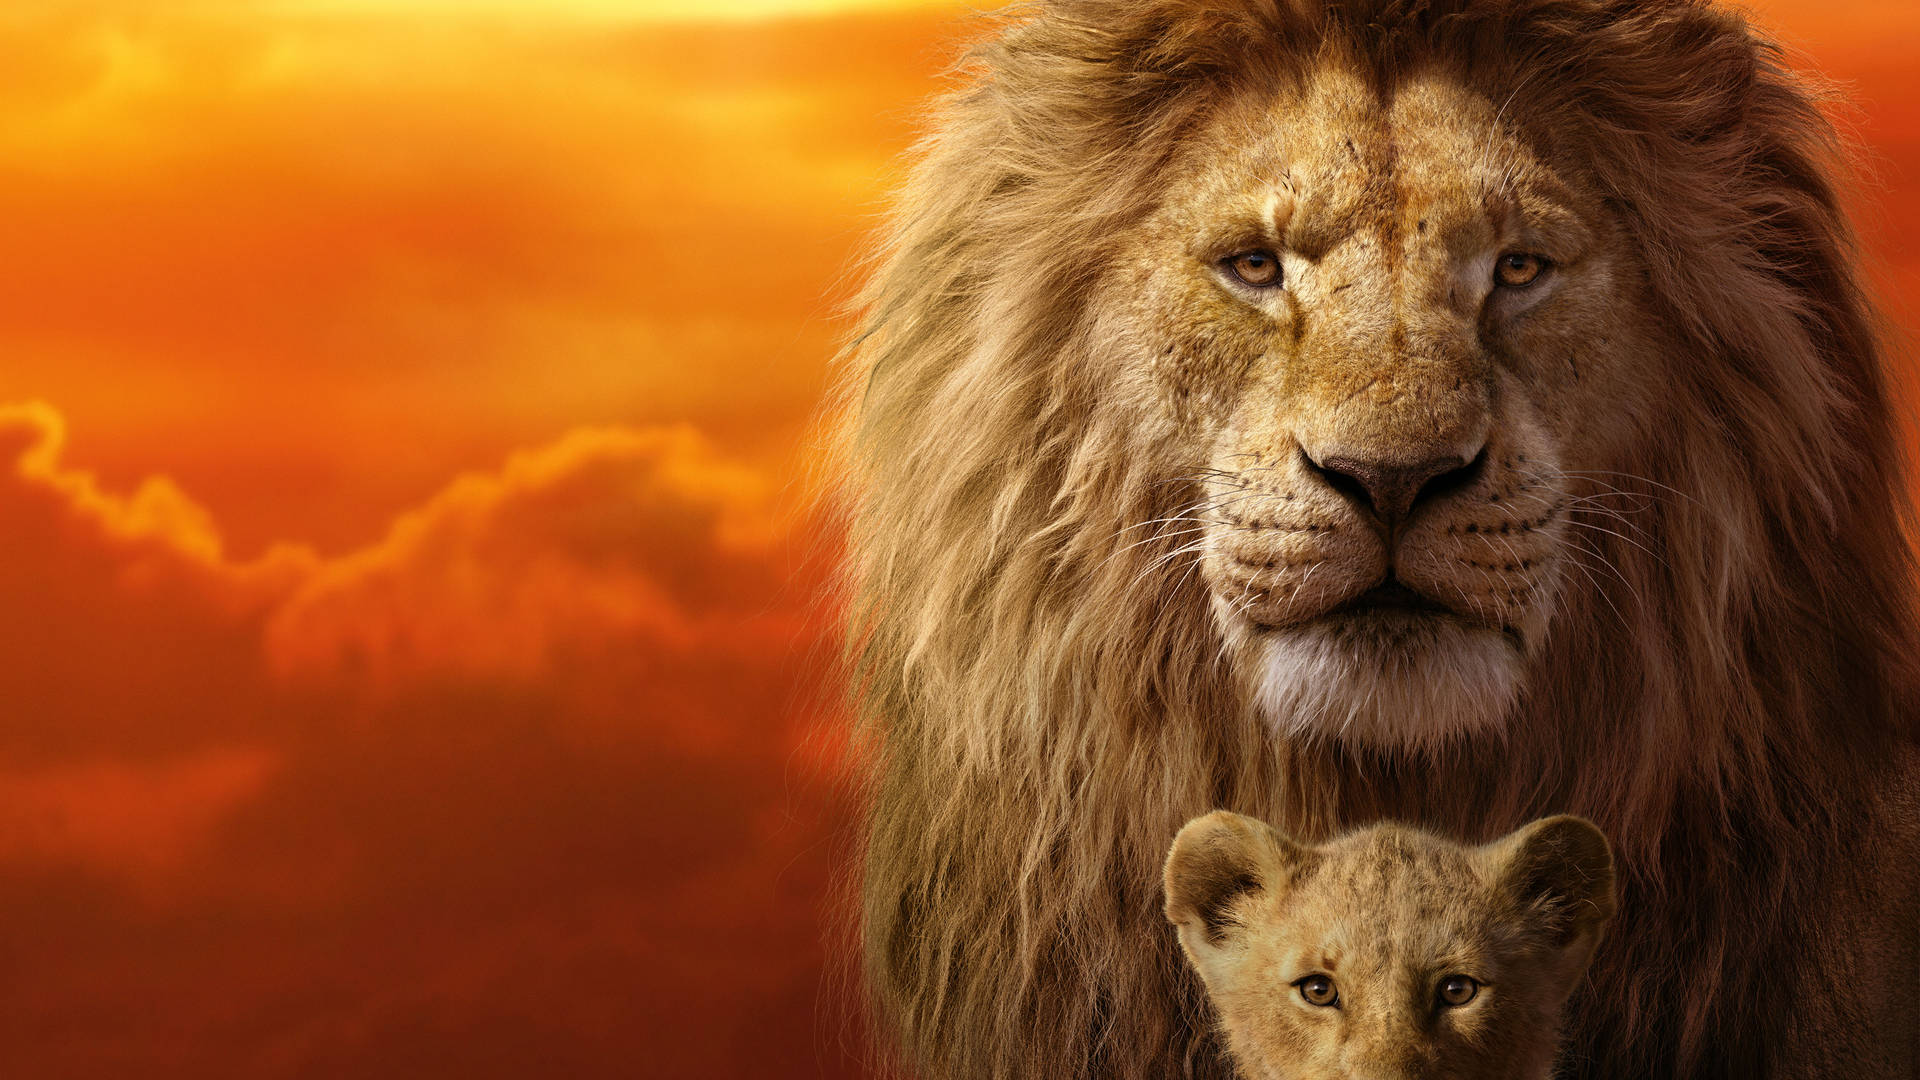 Mufasa teaches Simba to rule over the Pride Lands Wallpaper